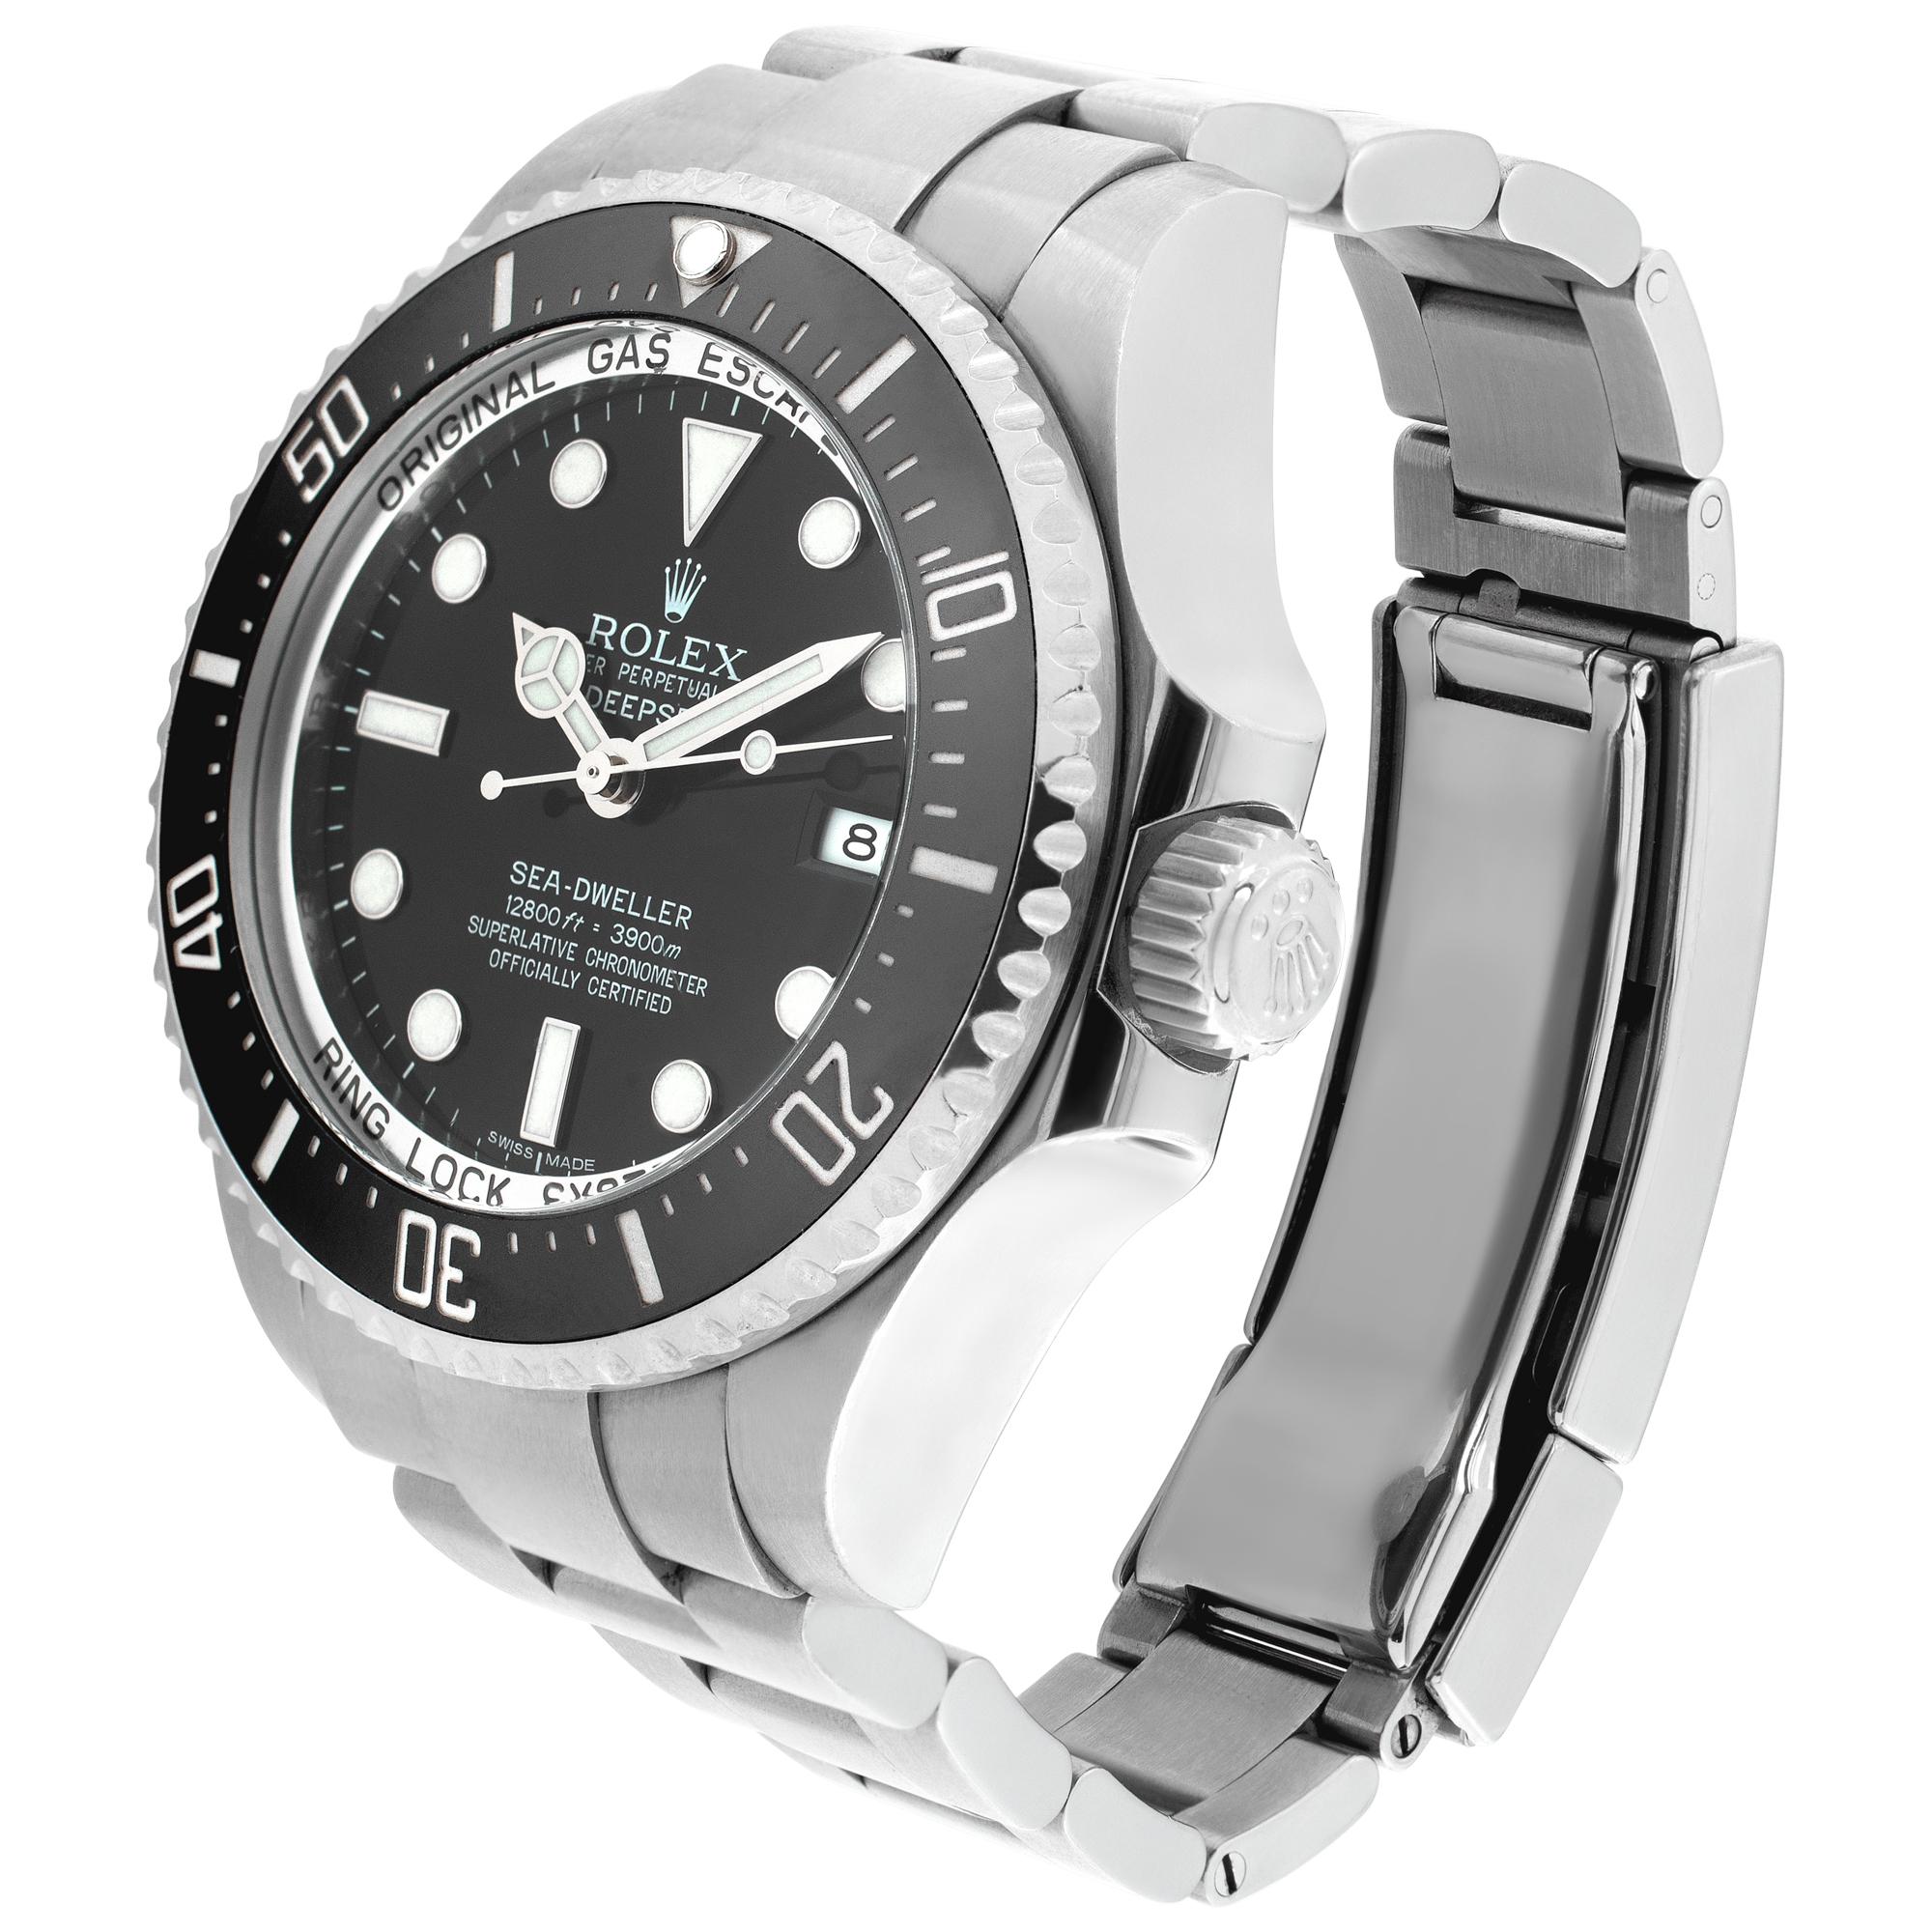 Rolex DeepSea SeaDweller in stainless steel with black dial & ceramic bezel on an Oyster bracelet. Auto w/ sweep seconds and date. 44 mm case size. Complete with factory service backed with a 2-year factory warranty as of 01/2023 **Bank wire only at